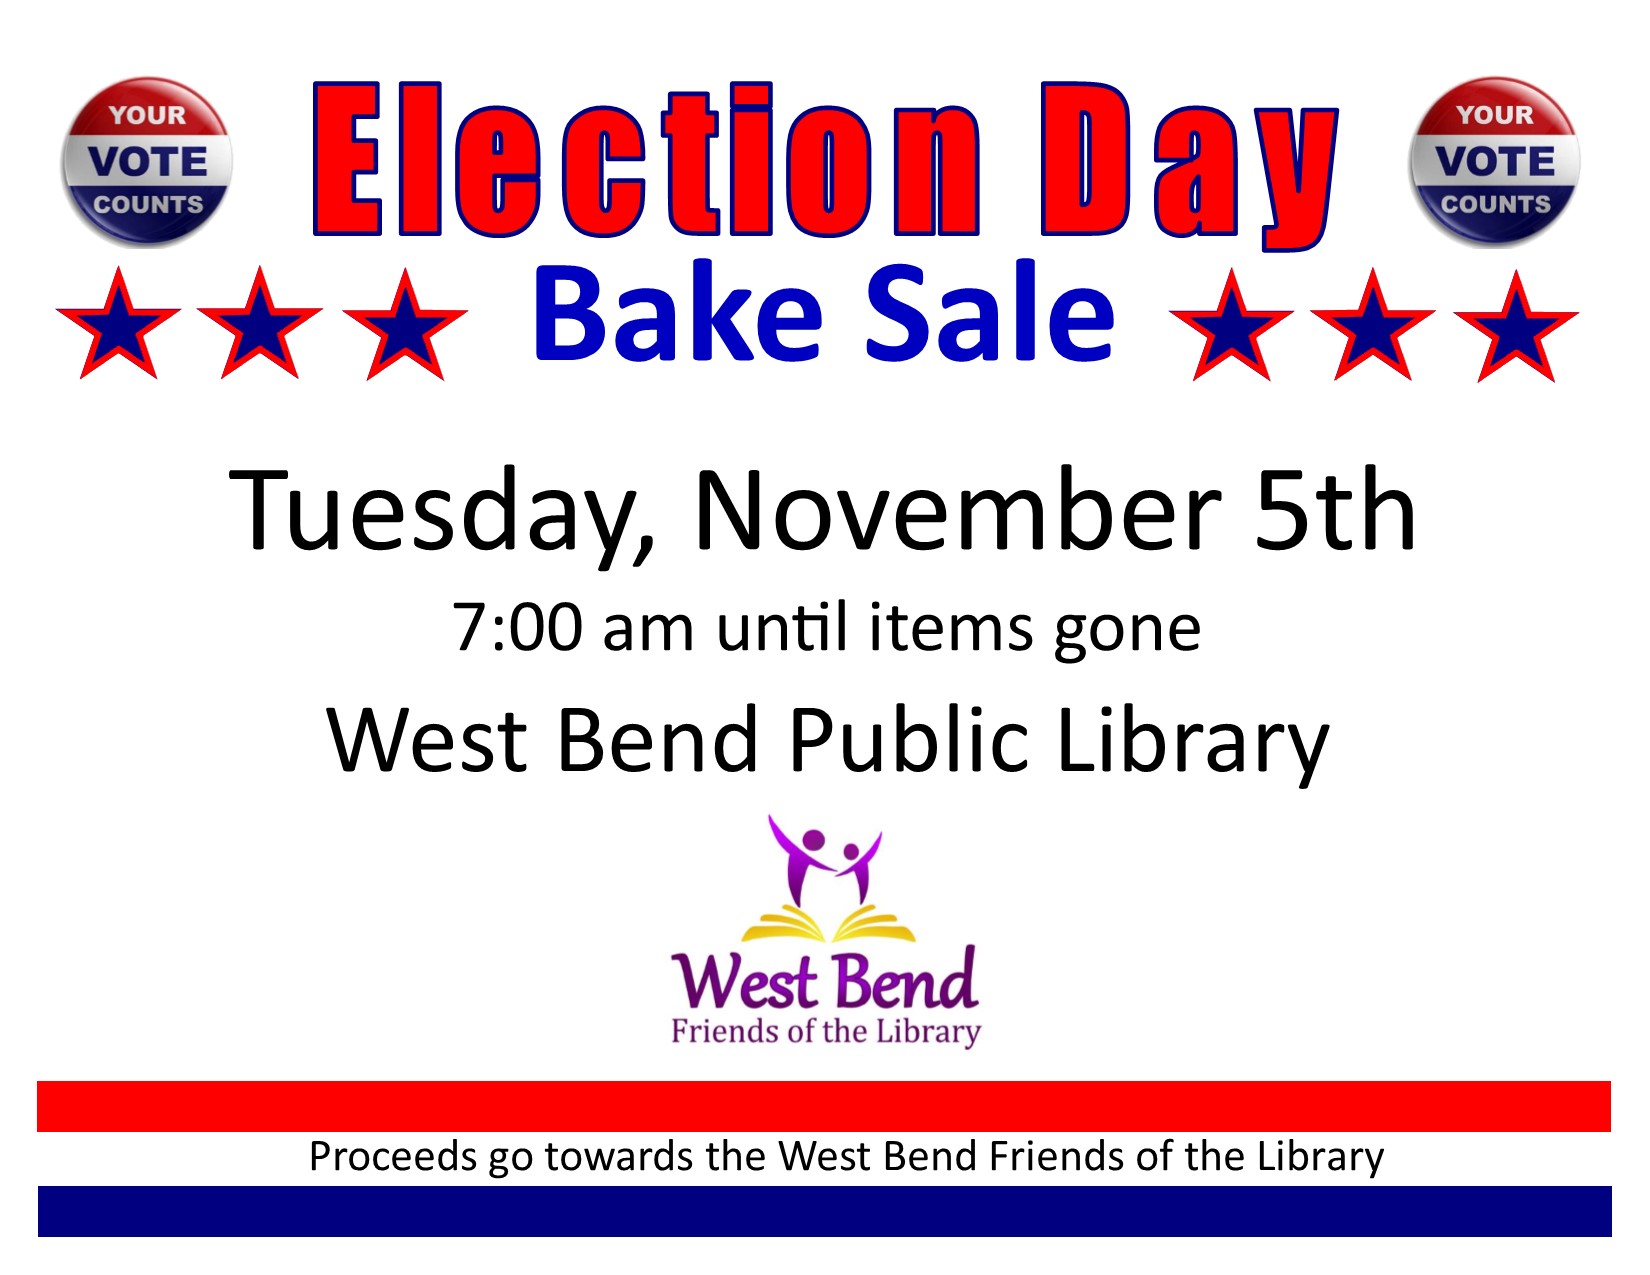 Election Day Bake Sale